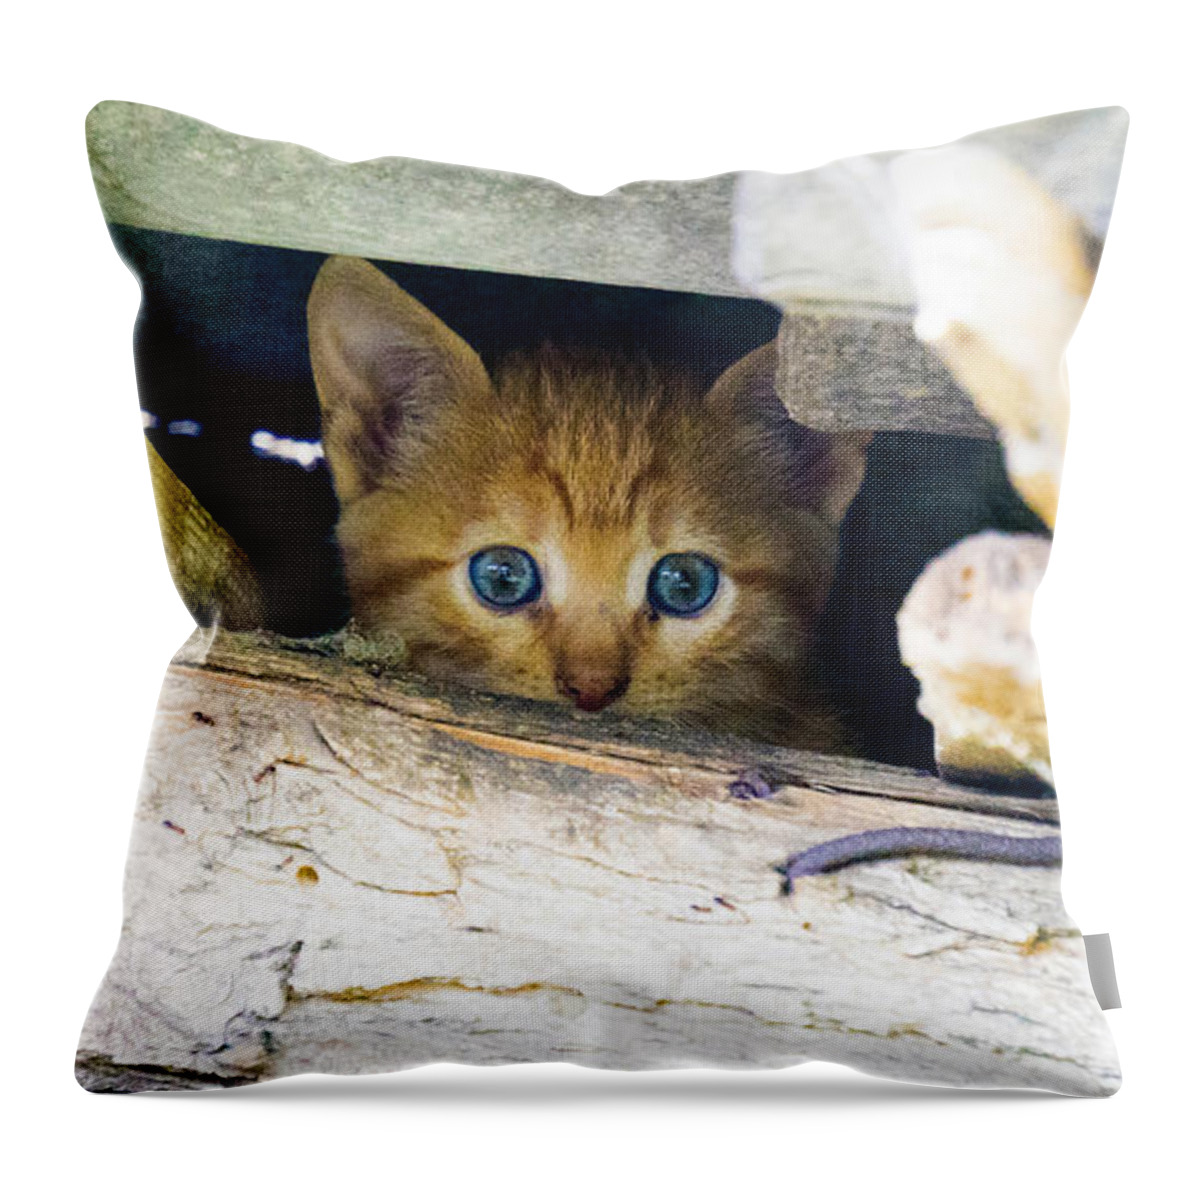 Cute Throw Pillow featuring the photograph Just Eyes by Milena Boeva